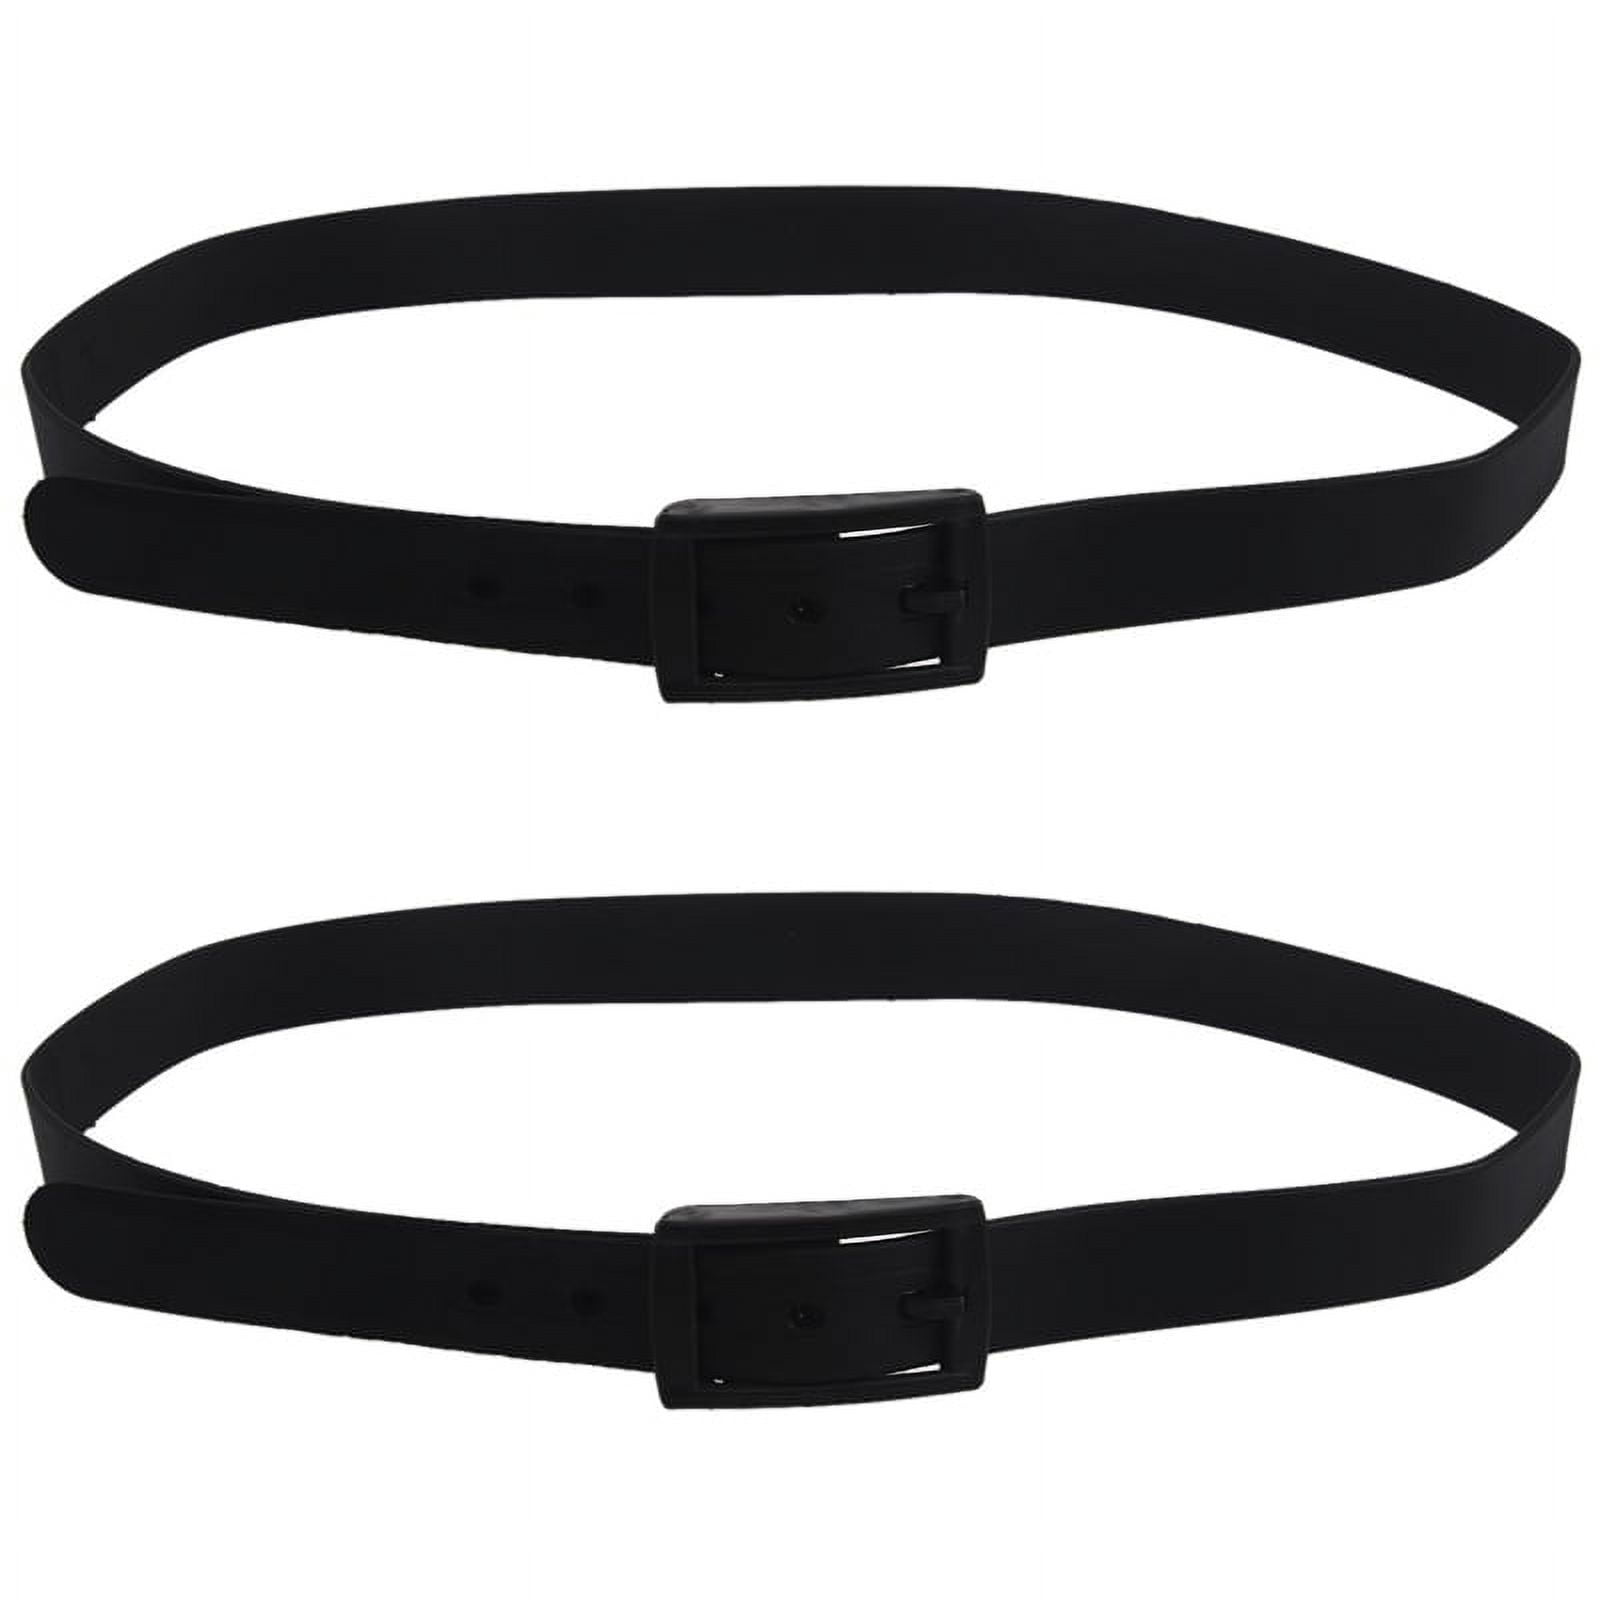 Plain Smooth Plastic Buckle Unisex Waist Belt Strap Silicone Rubber Leather  Belt Smooth Buckle Ceinture Casual Belts Belts Silicone Belt Waistband